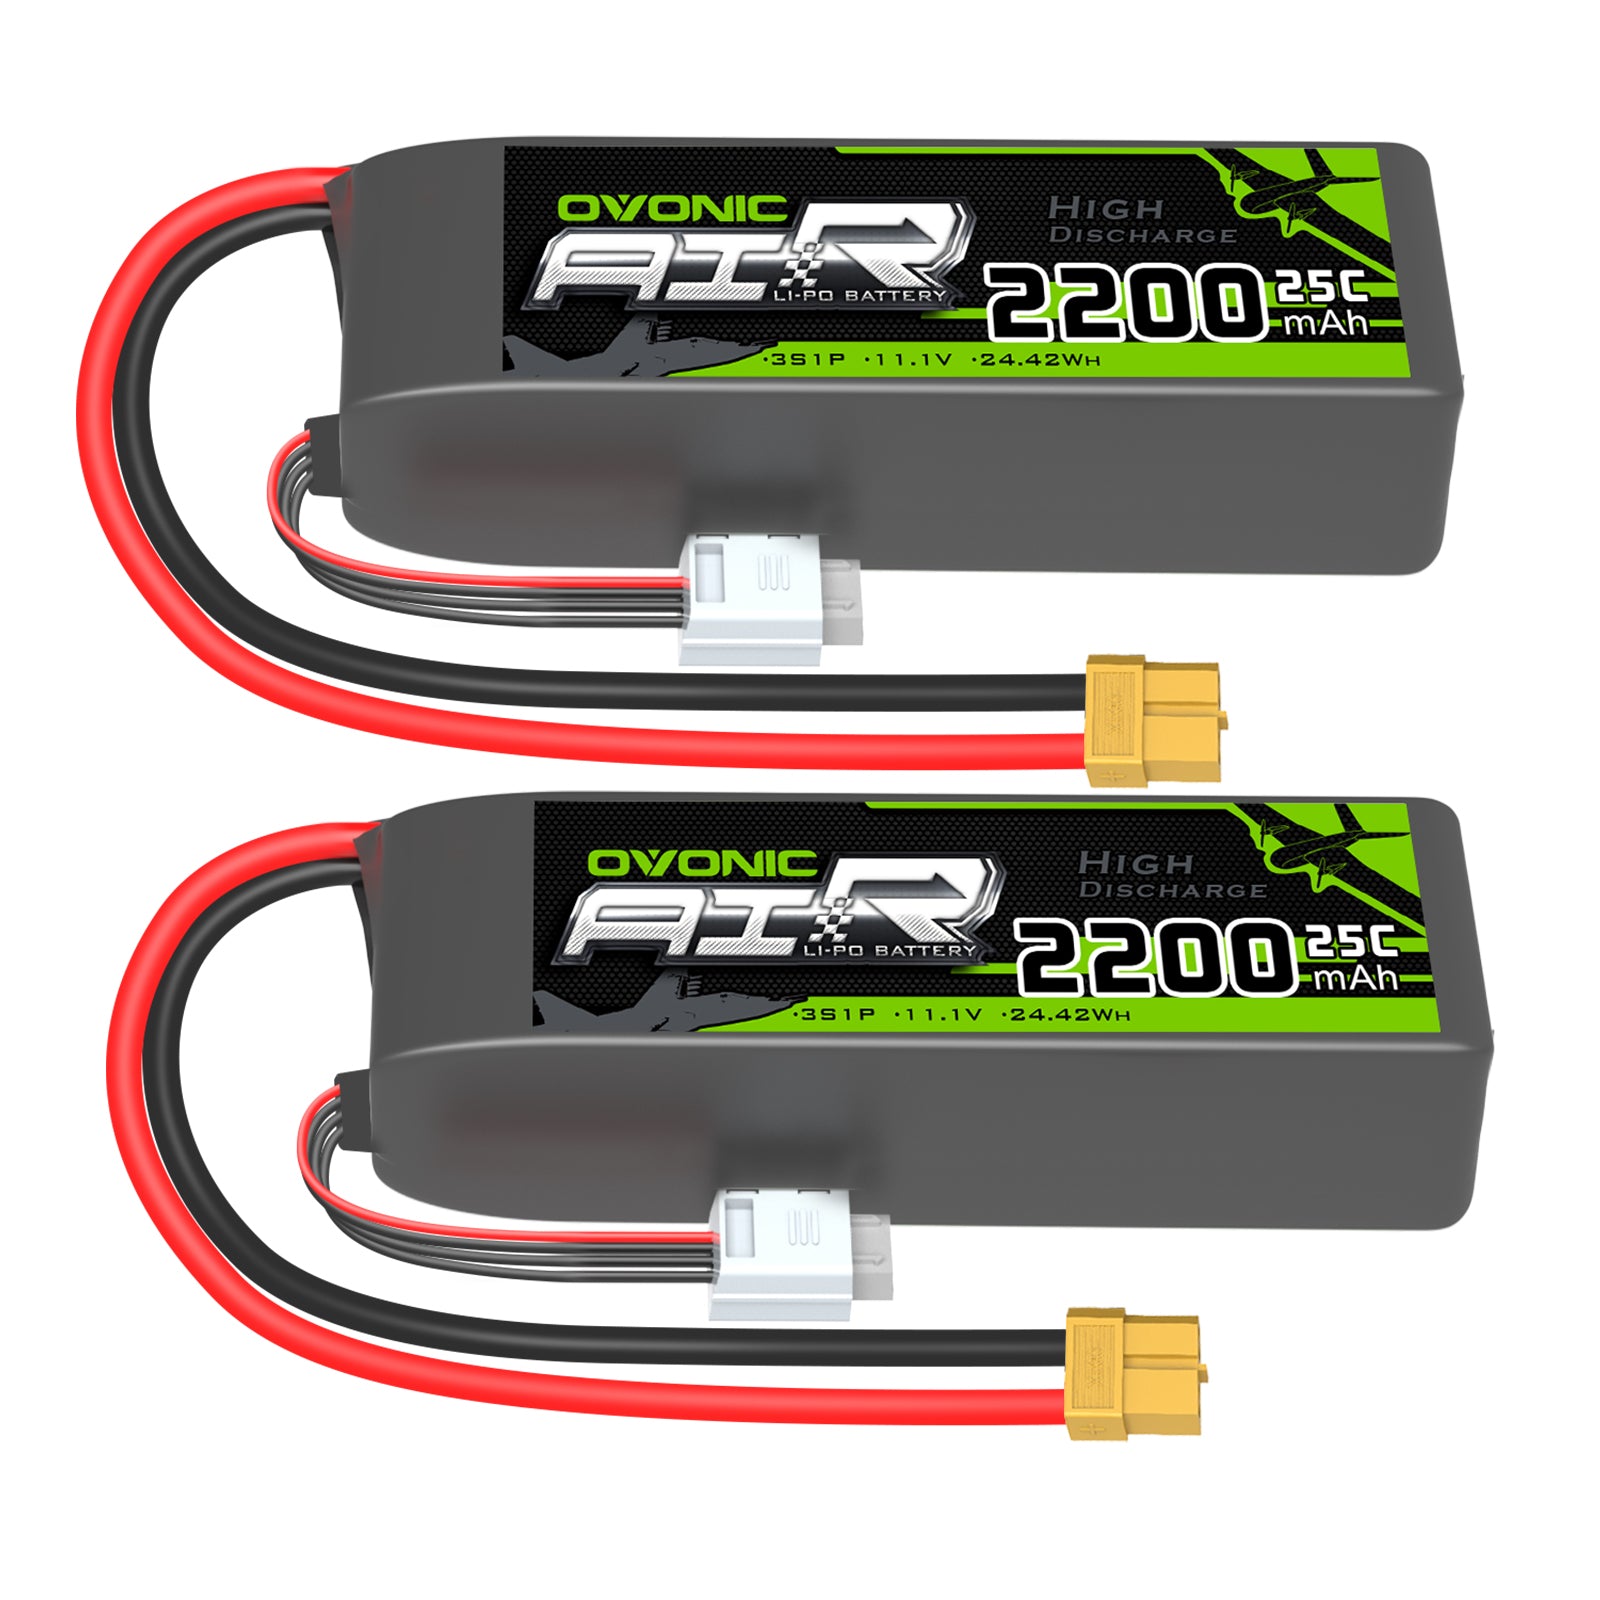 4×Ovonic 2200mAh 25C 3S1P 11.1V Lipo Battery with XT60 for Freewing Dynam